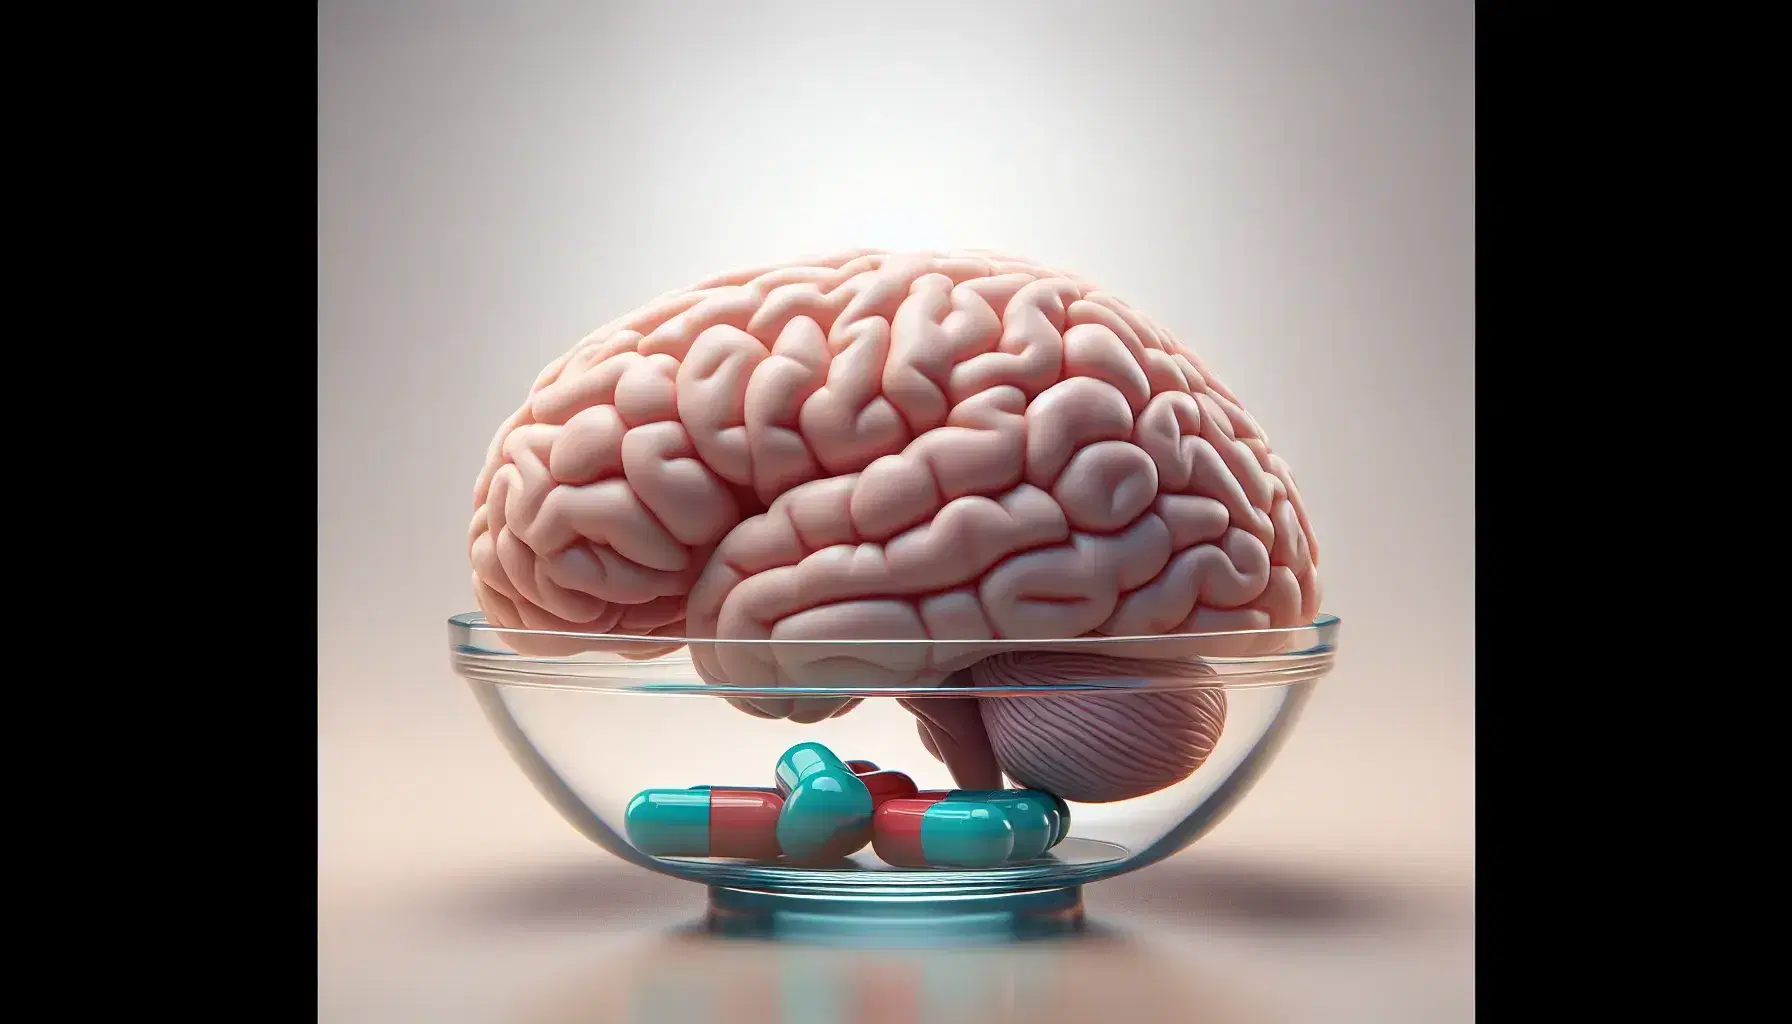 Three-dimensional model of the human brain with frontal, parietal, occipital and temporal lobes, next to three colored pills in a glass bowl and a hand reaching towards the brain.